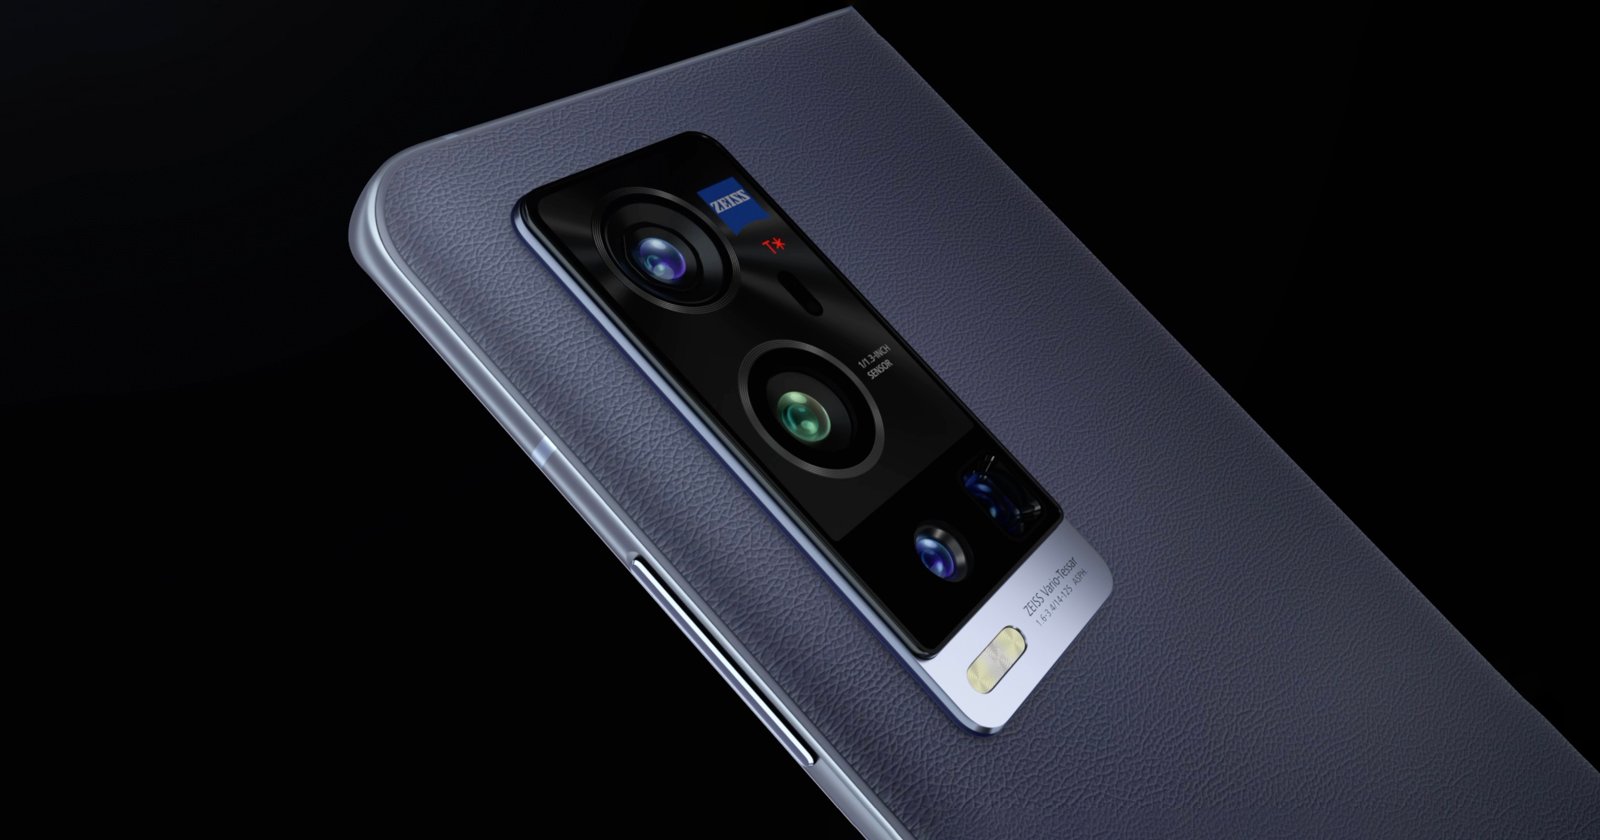 The Vivo X60 Pro Plus Smartphone has a camera co-developed with Zeiss